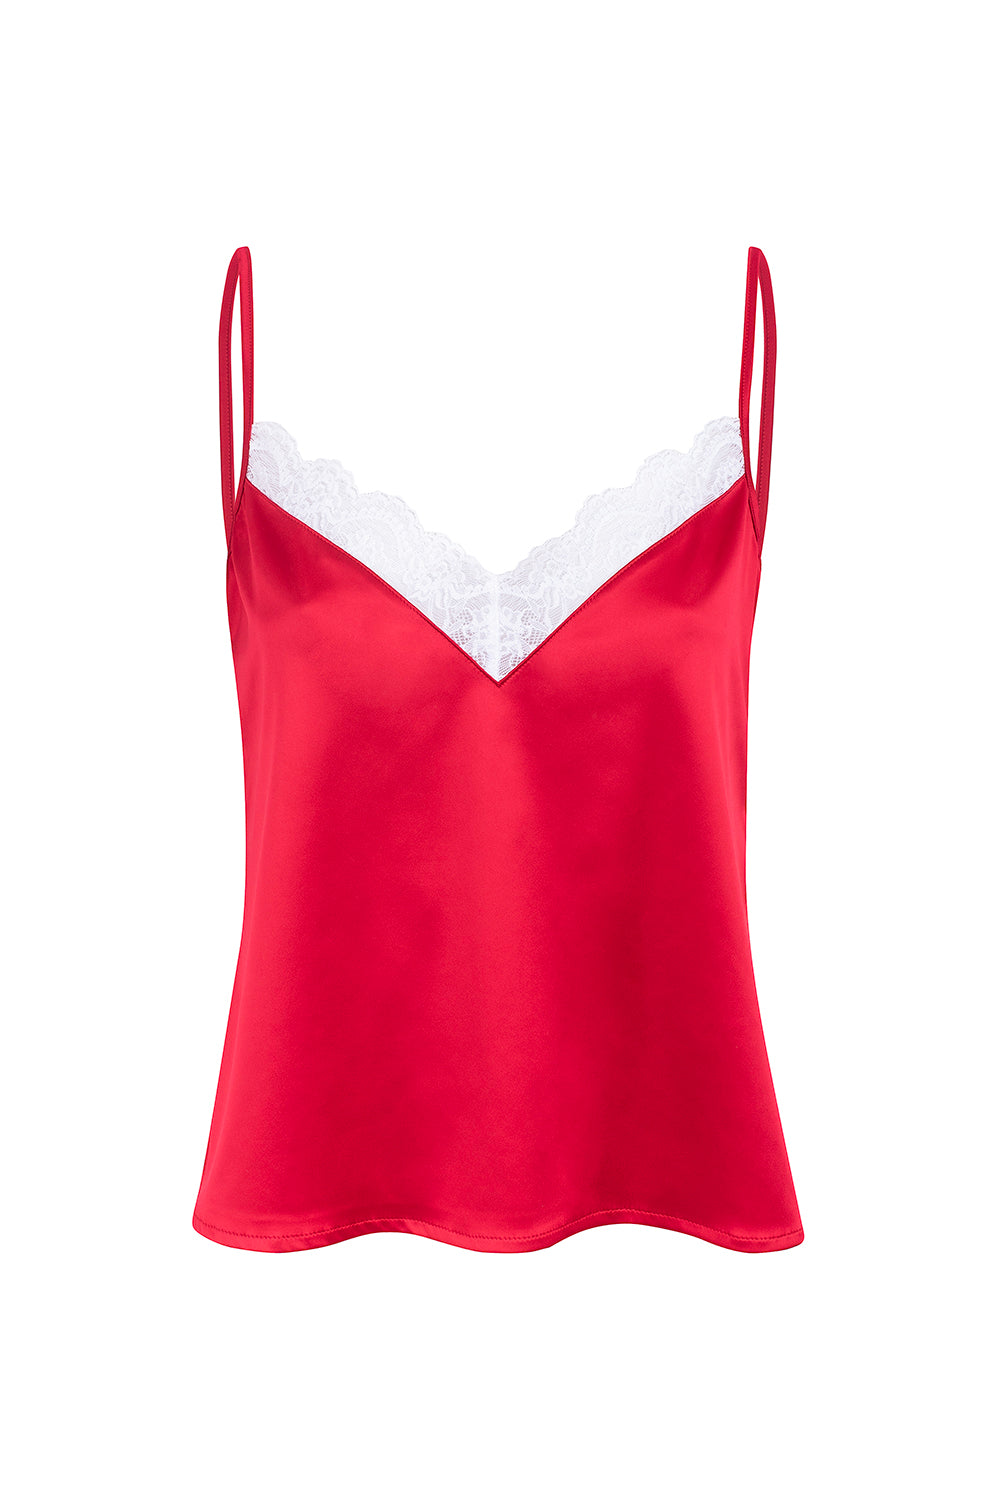 RED SATIN & LACE TOP – Missus